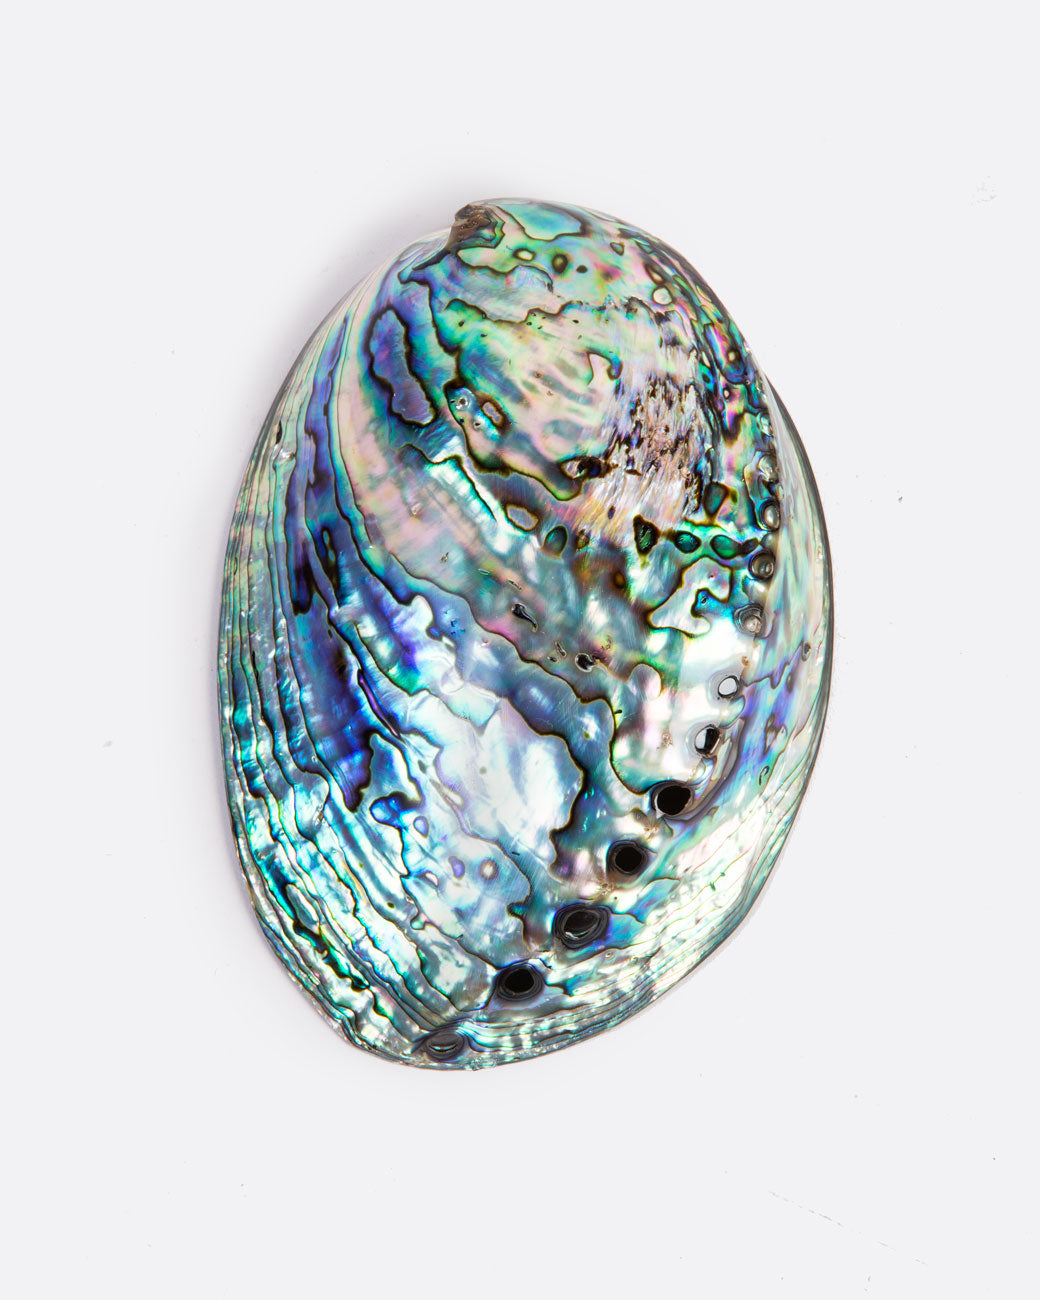 a colorful abalone shell with a glossy finish sits on a white surface.